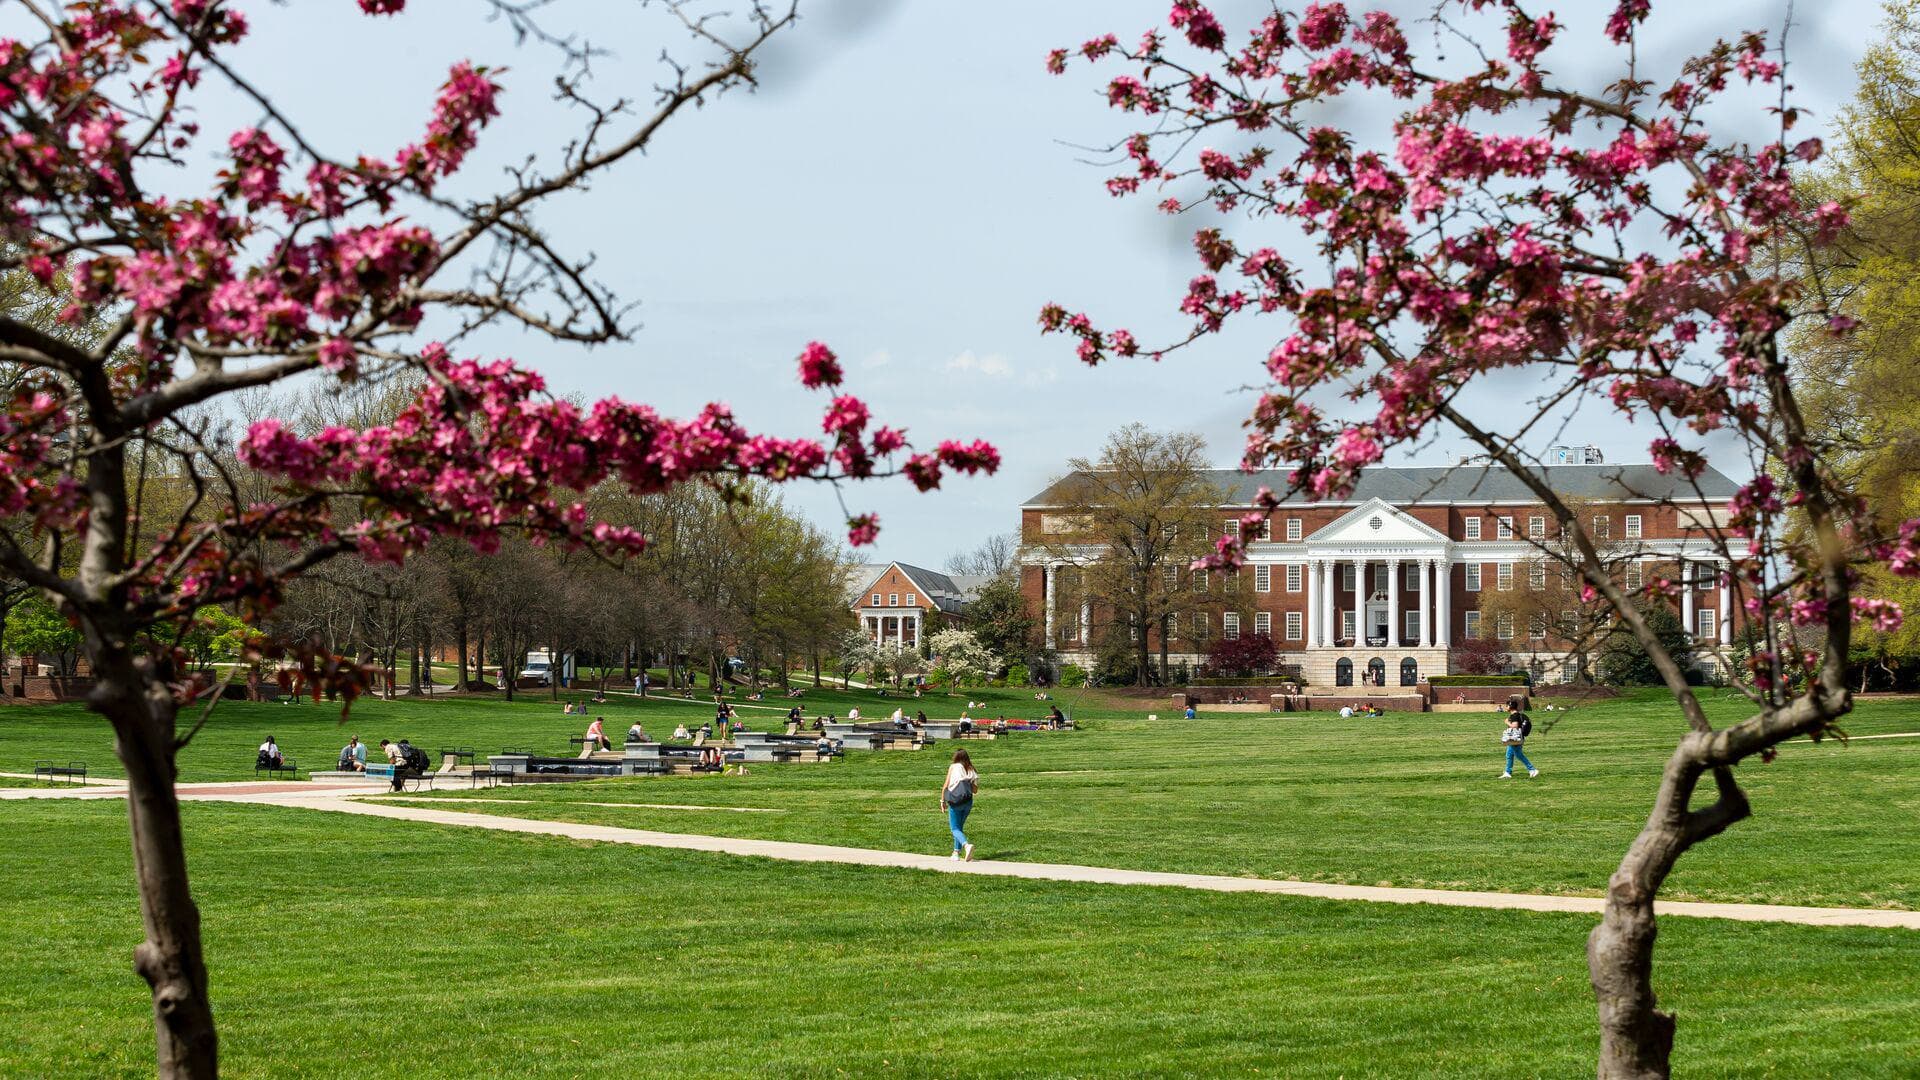 Students walking outdoor on campus in the spring